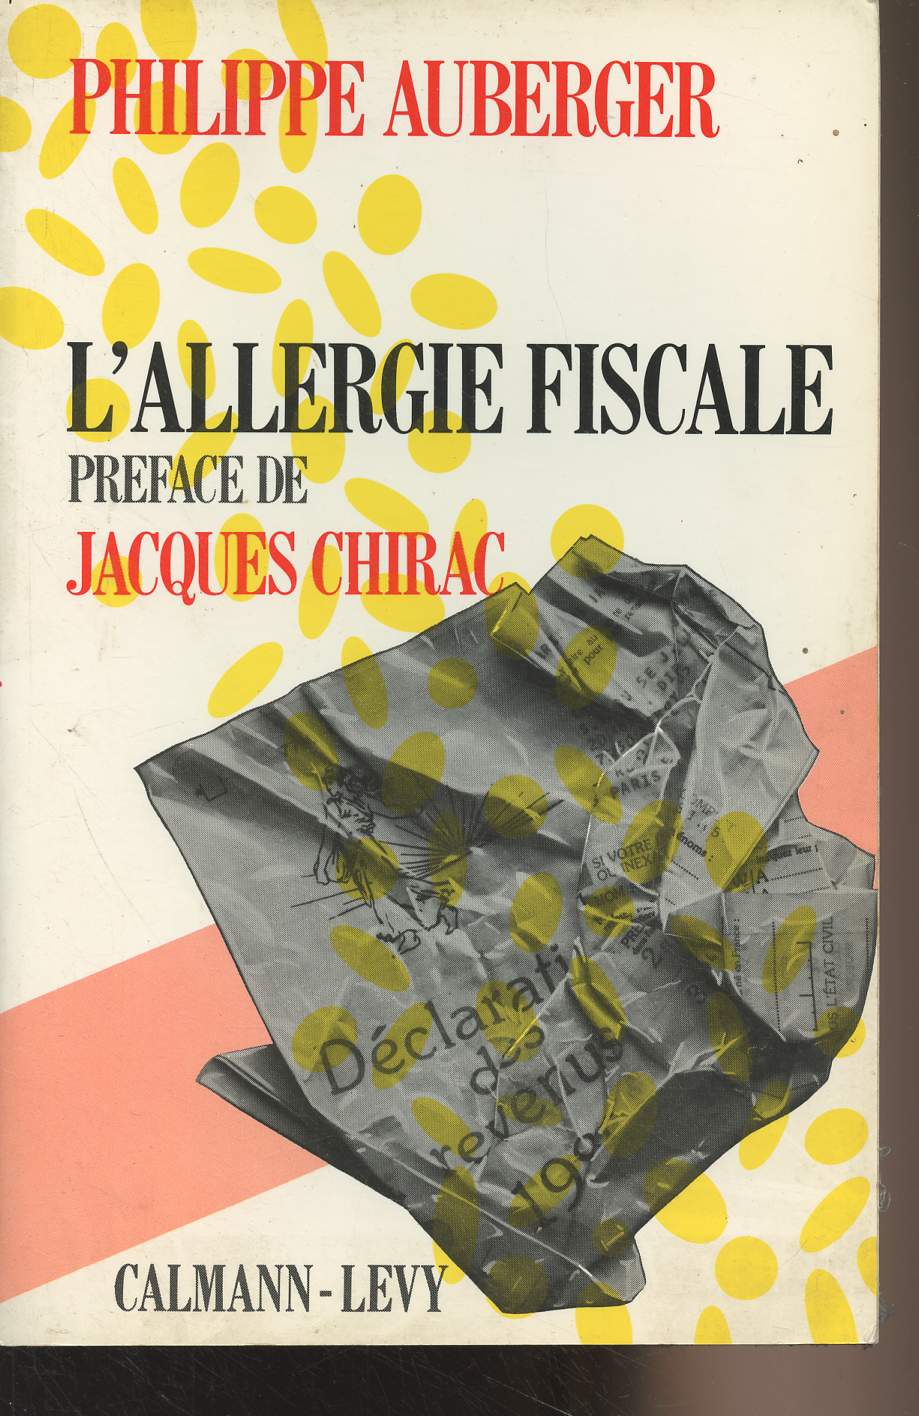 L'allergie fiscale